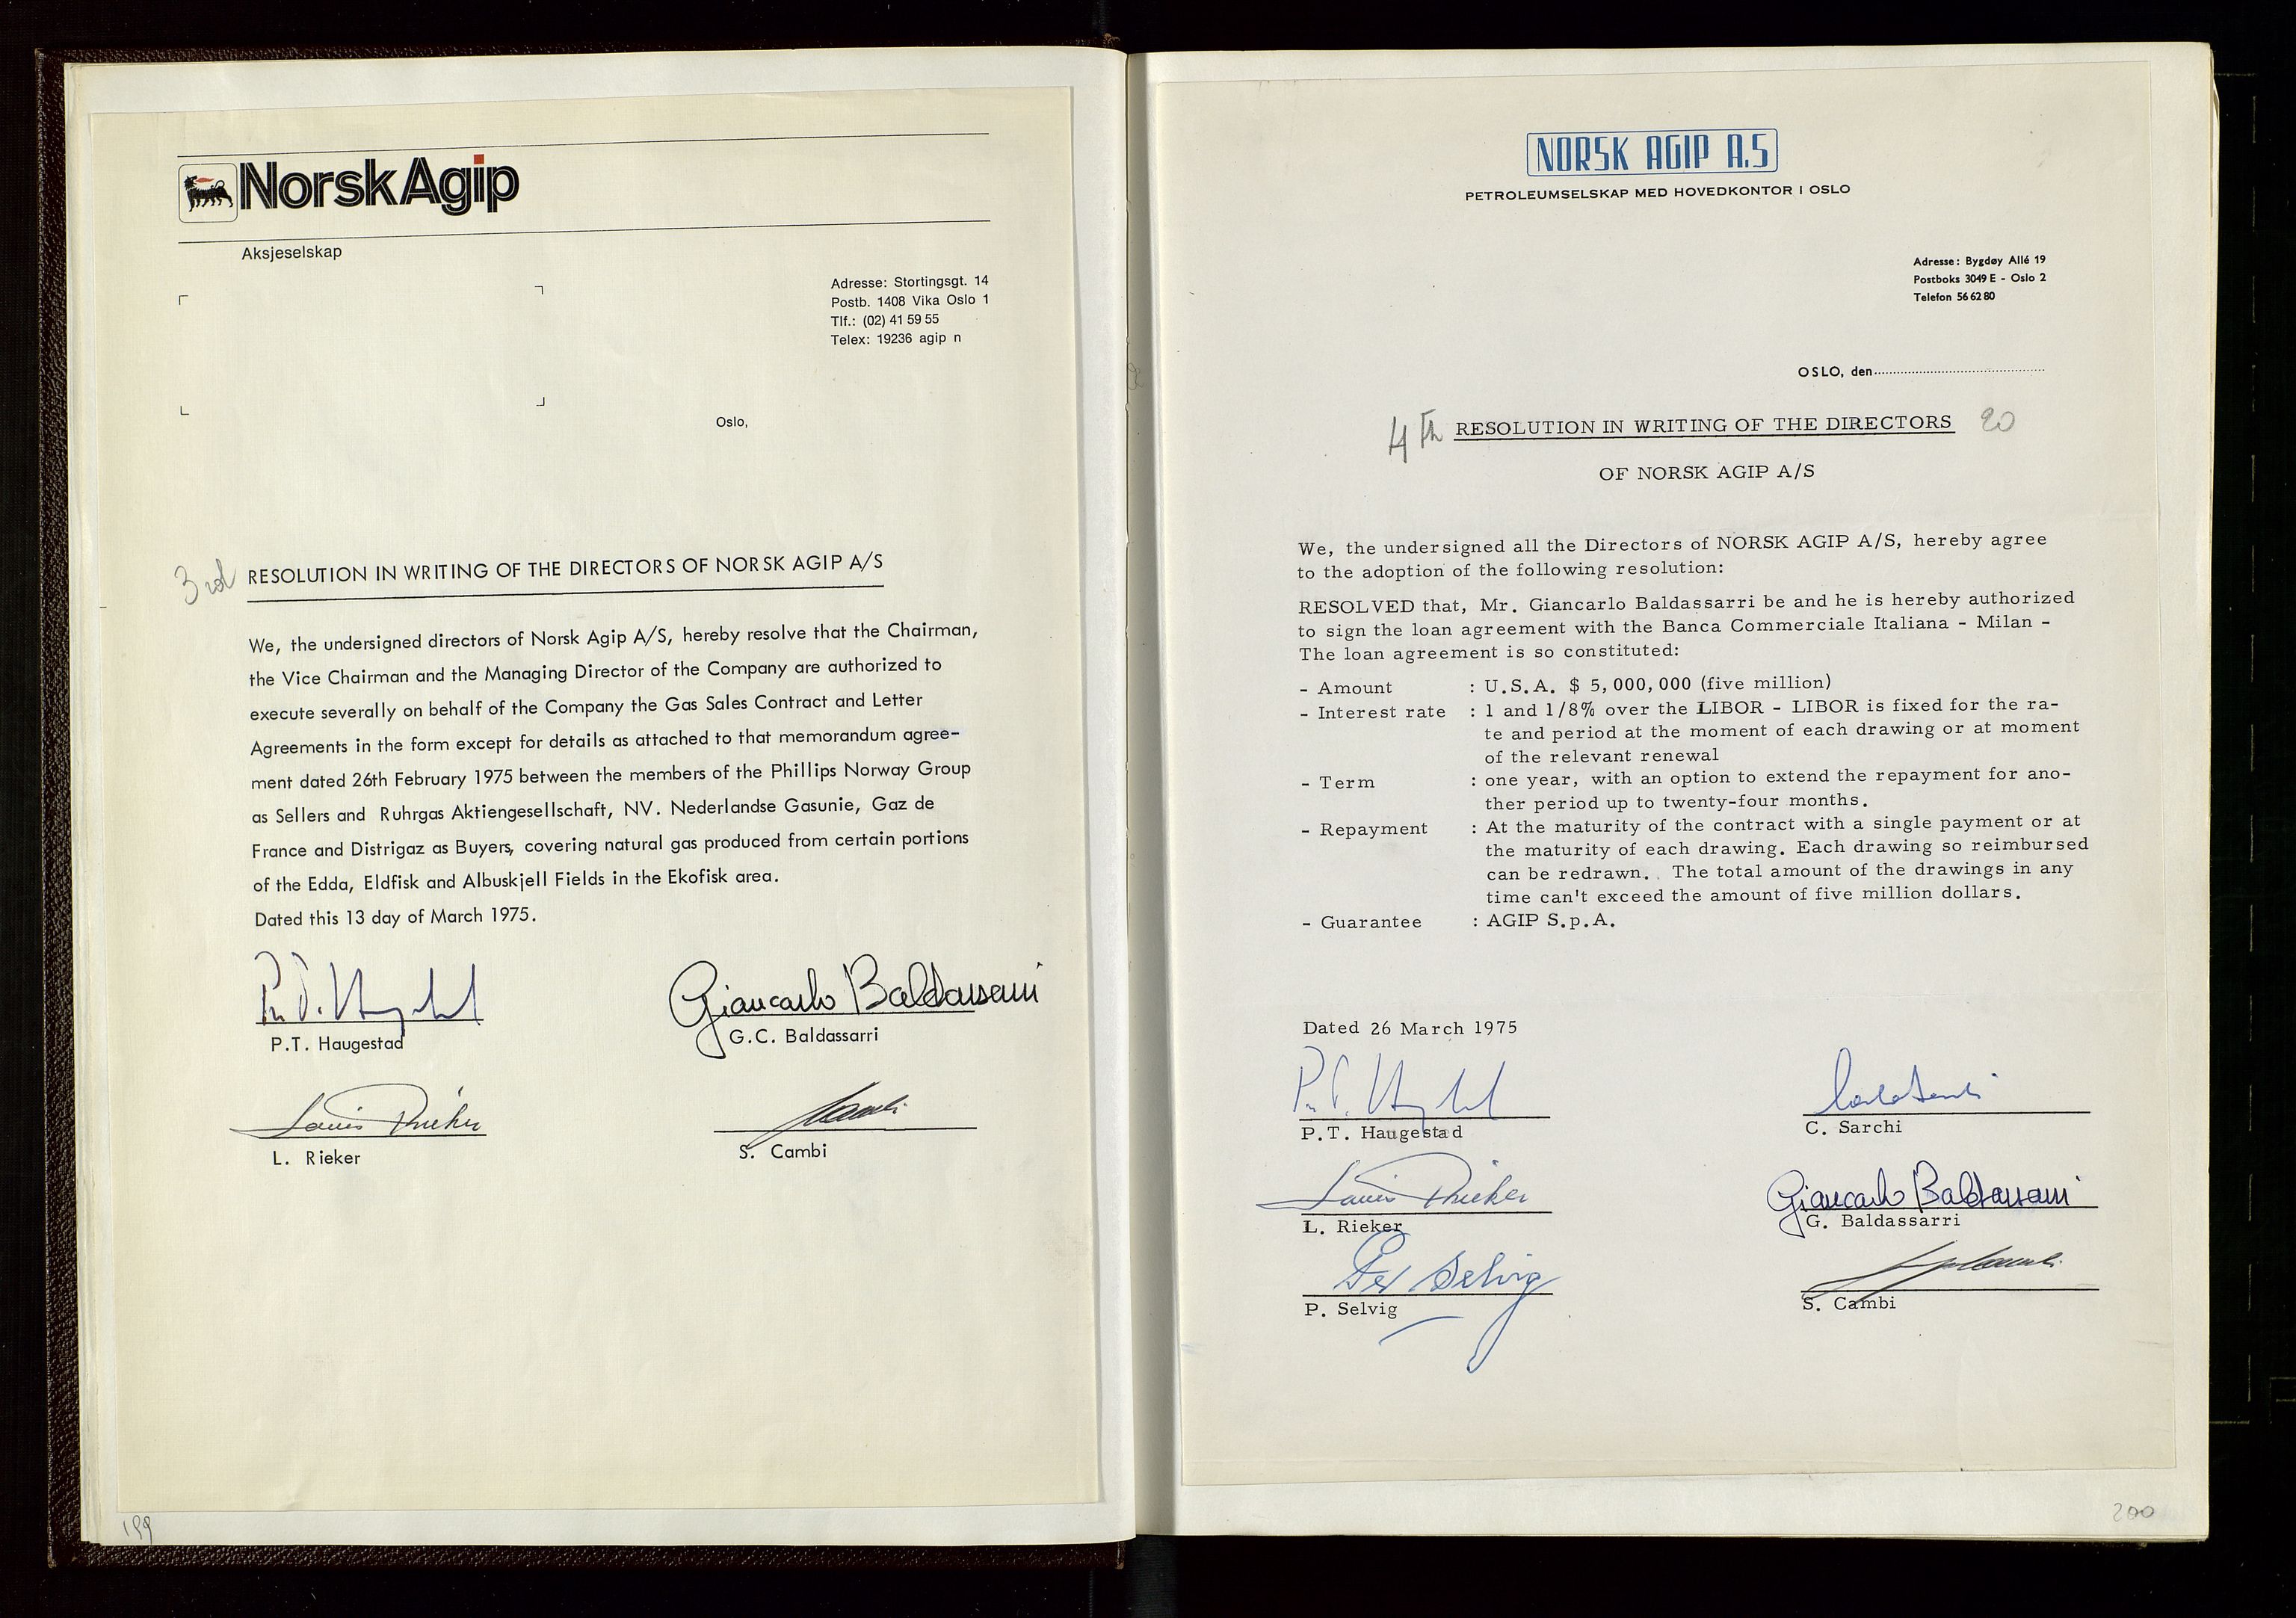 Pa 1583 - Norsk Agip AS, SAST/A-102138/A/Aa/L0002: General assembly and Board of Directors meeting minutes, 1972-1979, s. 199-200